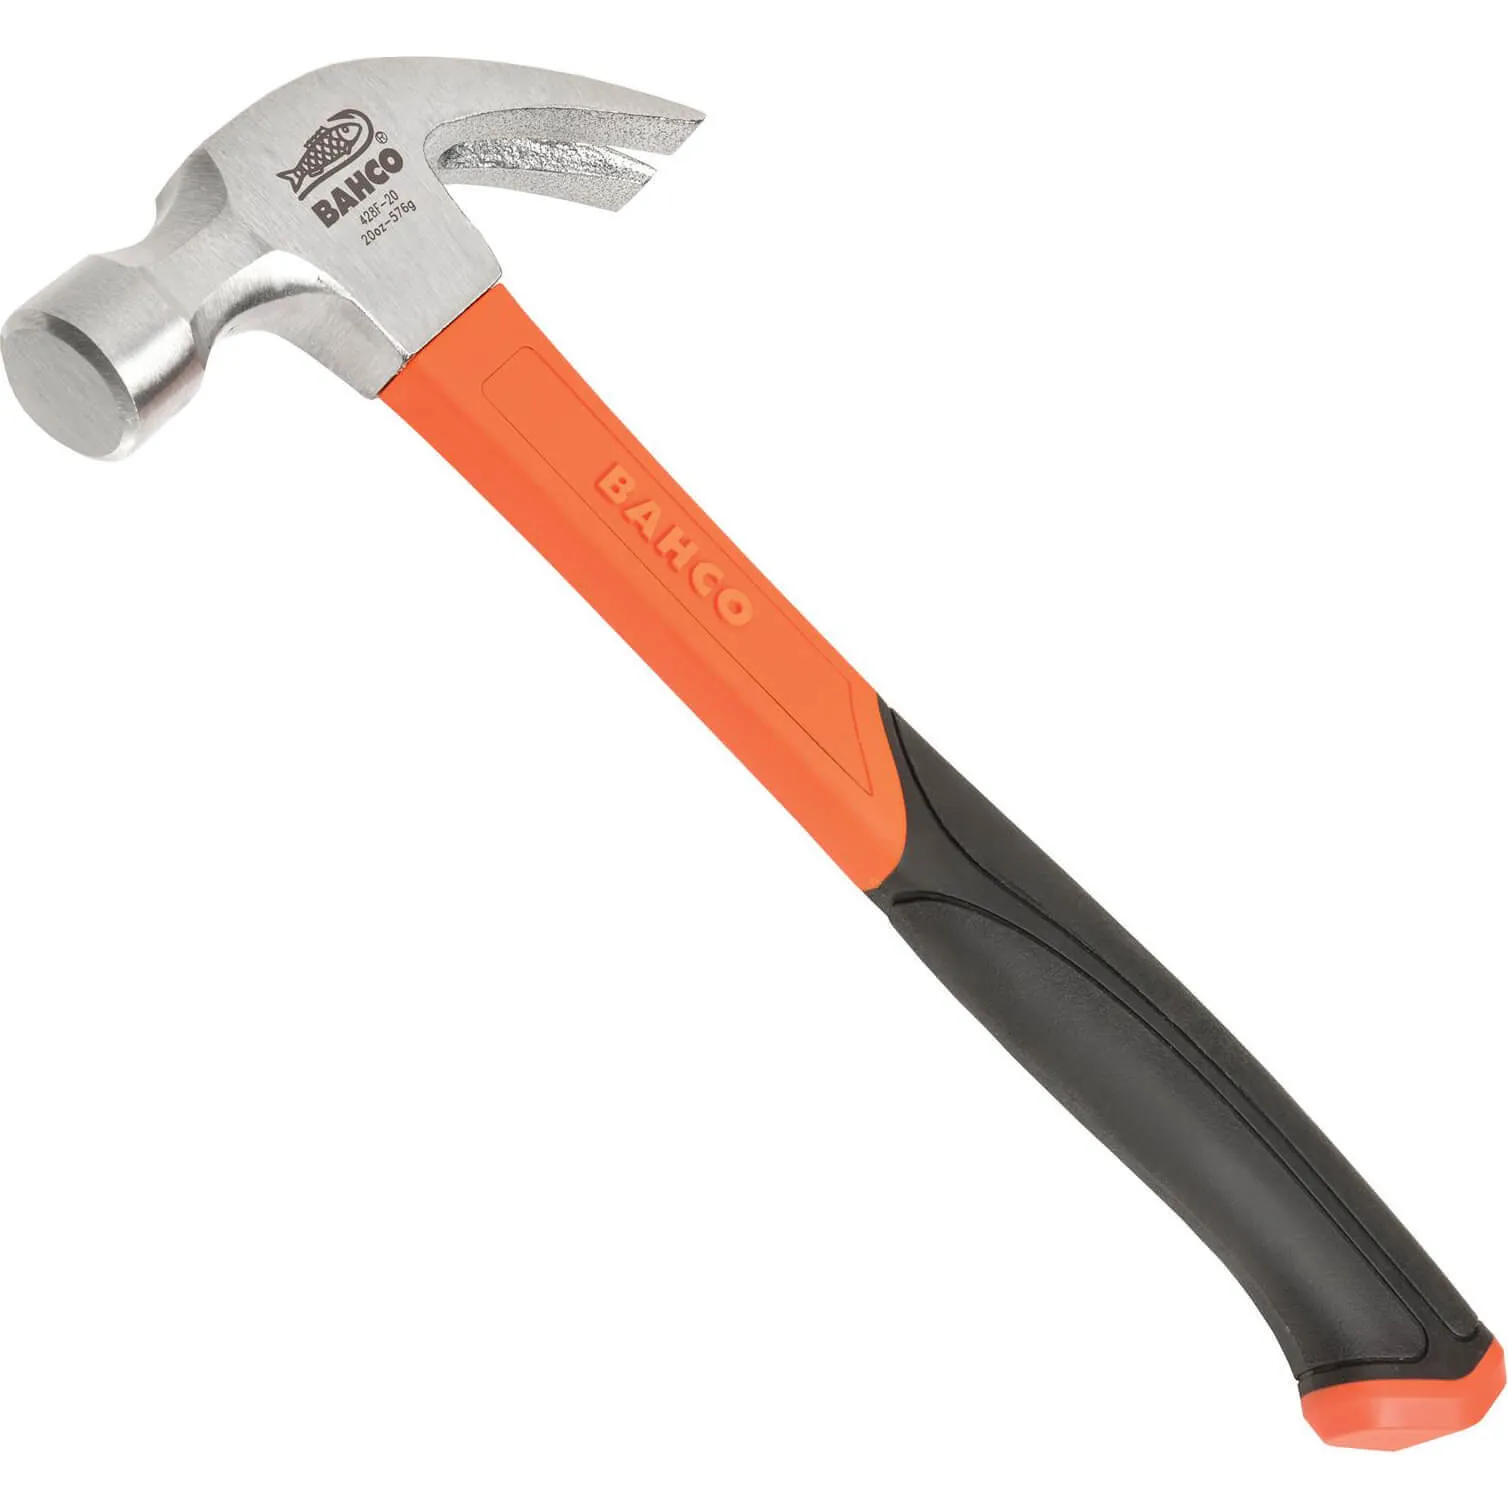 Bahco 428 Curved Fibreglass Claw Hammer - 570g